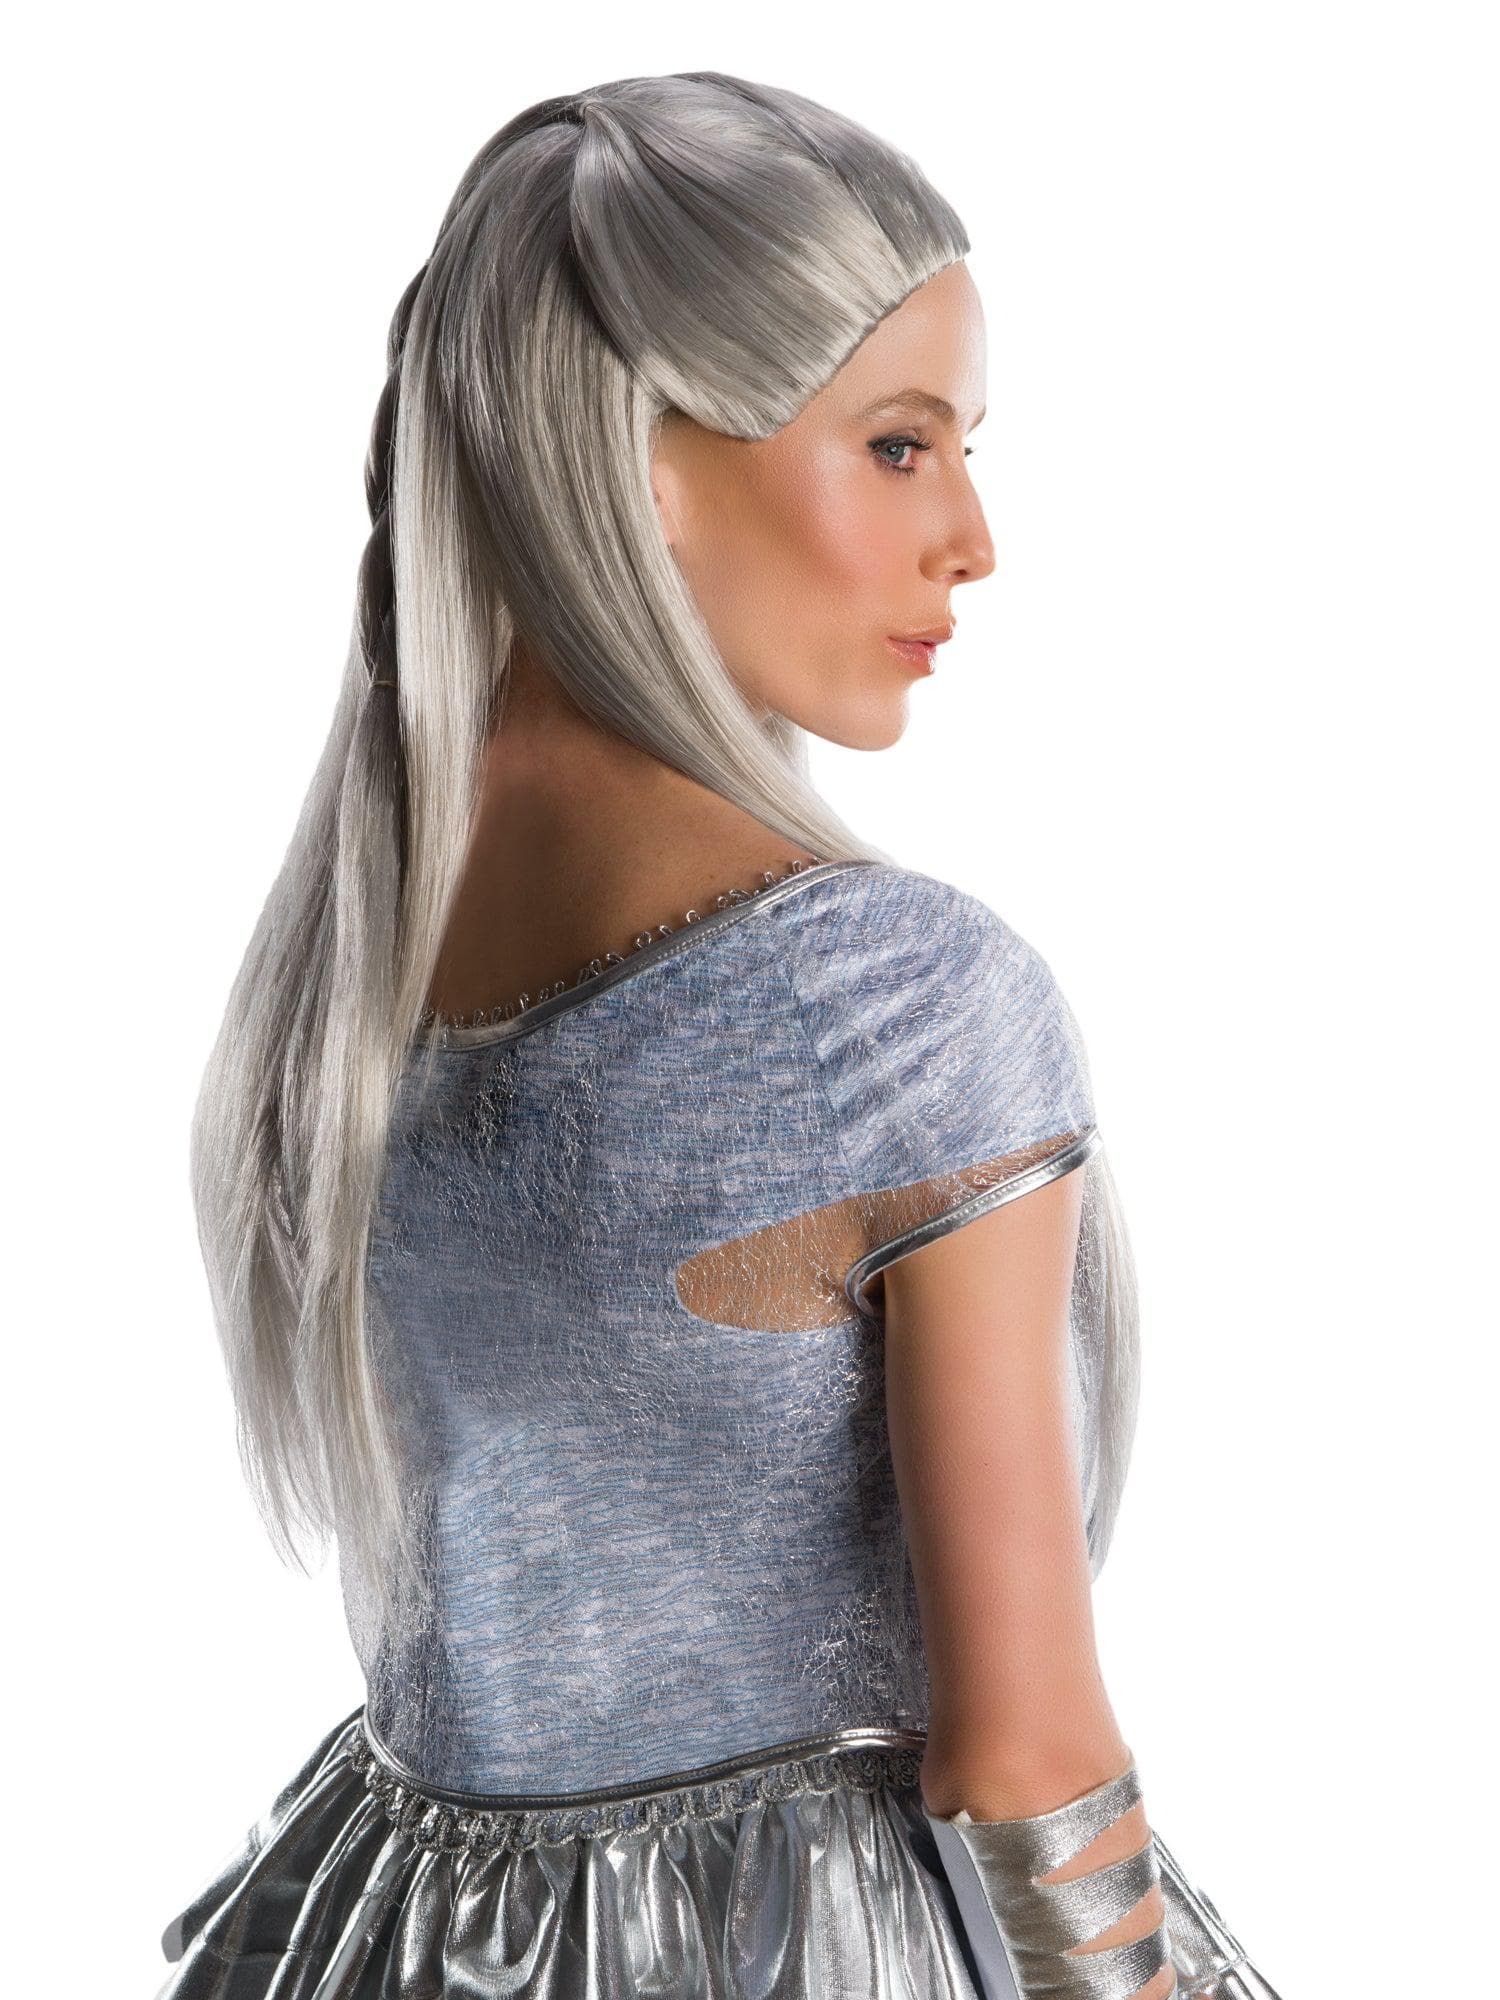 Women's Snow White and the Huntsman Freya's Silver Wig - costumes.com